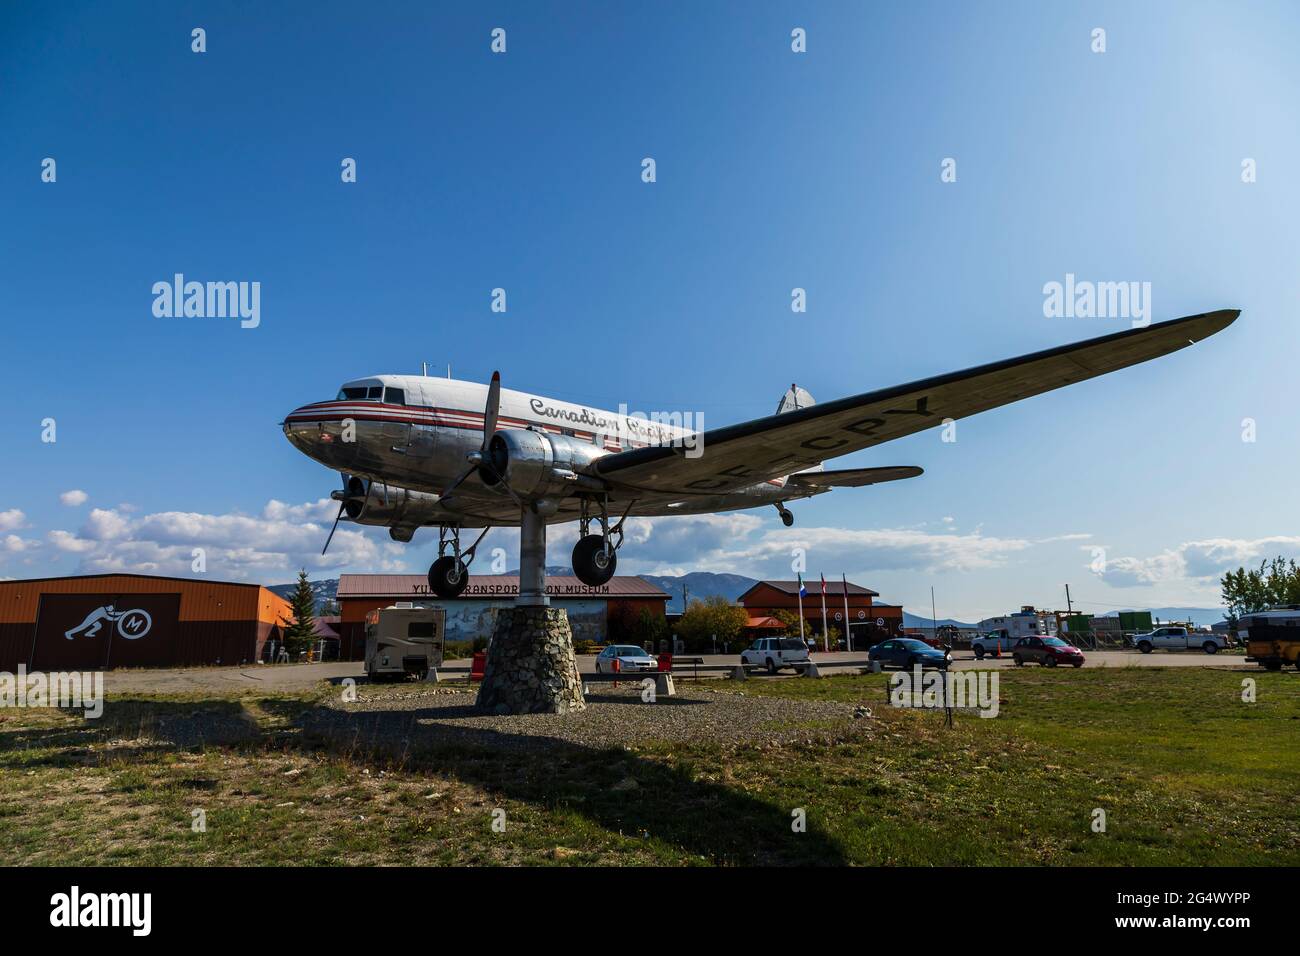 Douglas DC-3 weathervane, located in front of the Transportation Museum Whitehorse, Yukon, Canada Stock Photo